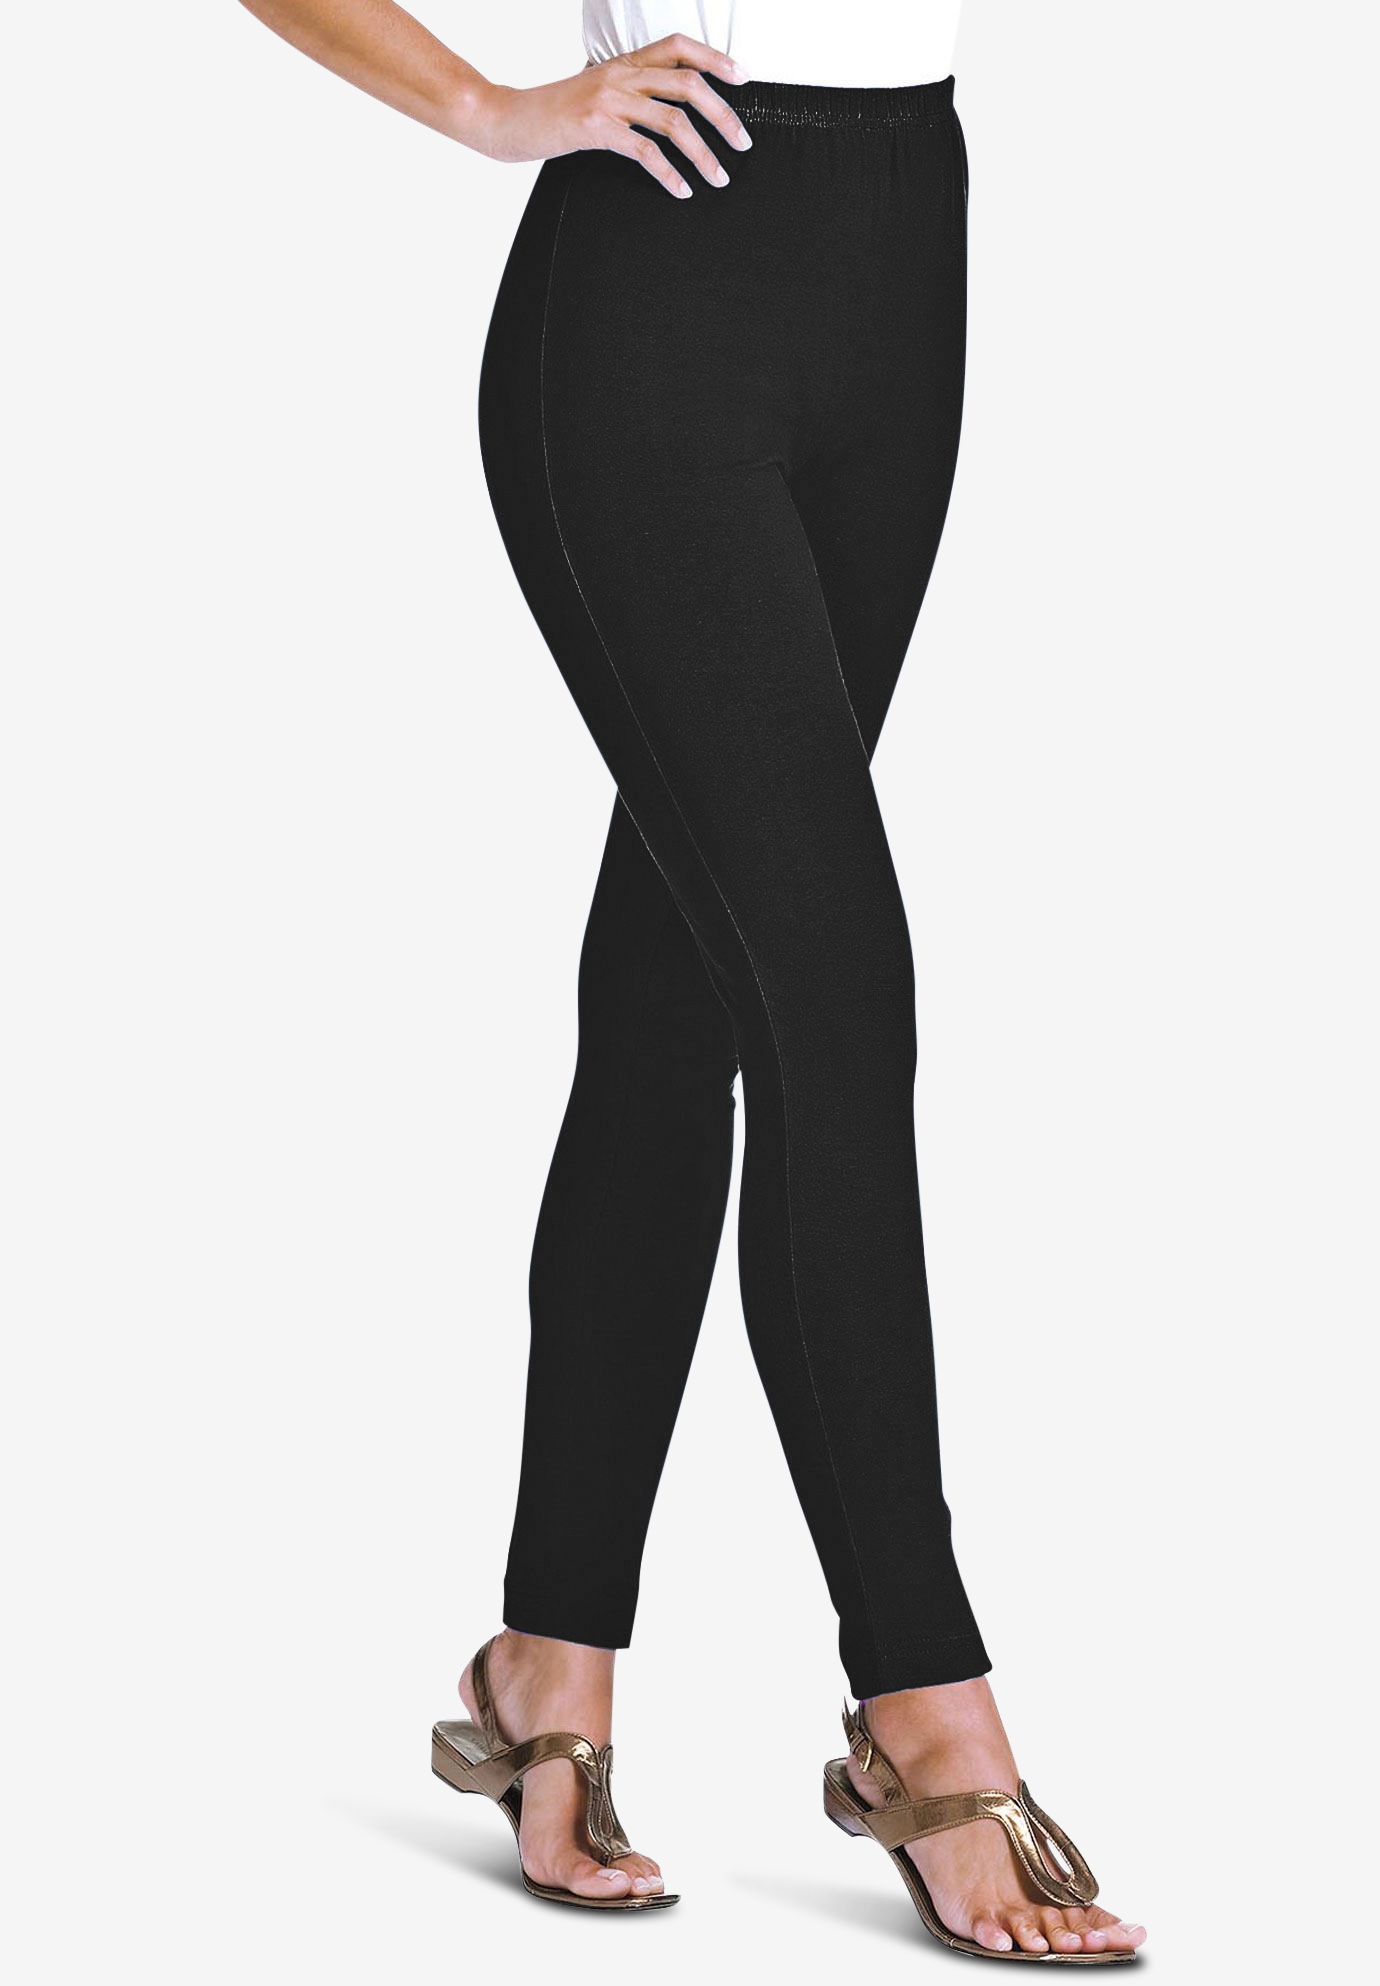 TheLovely Women & Plus Soft Cotton Active Stretch Ankle Length Lightweight  Leggings